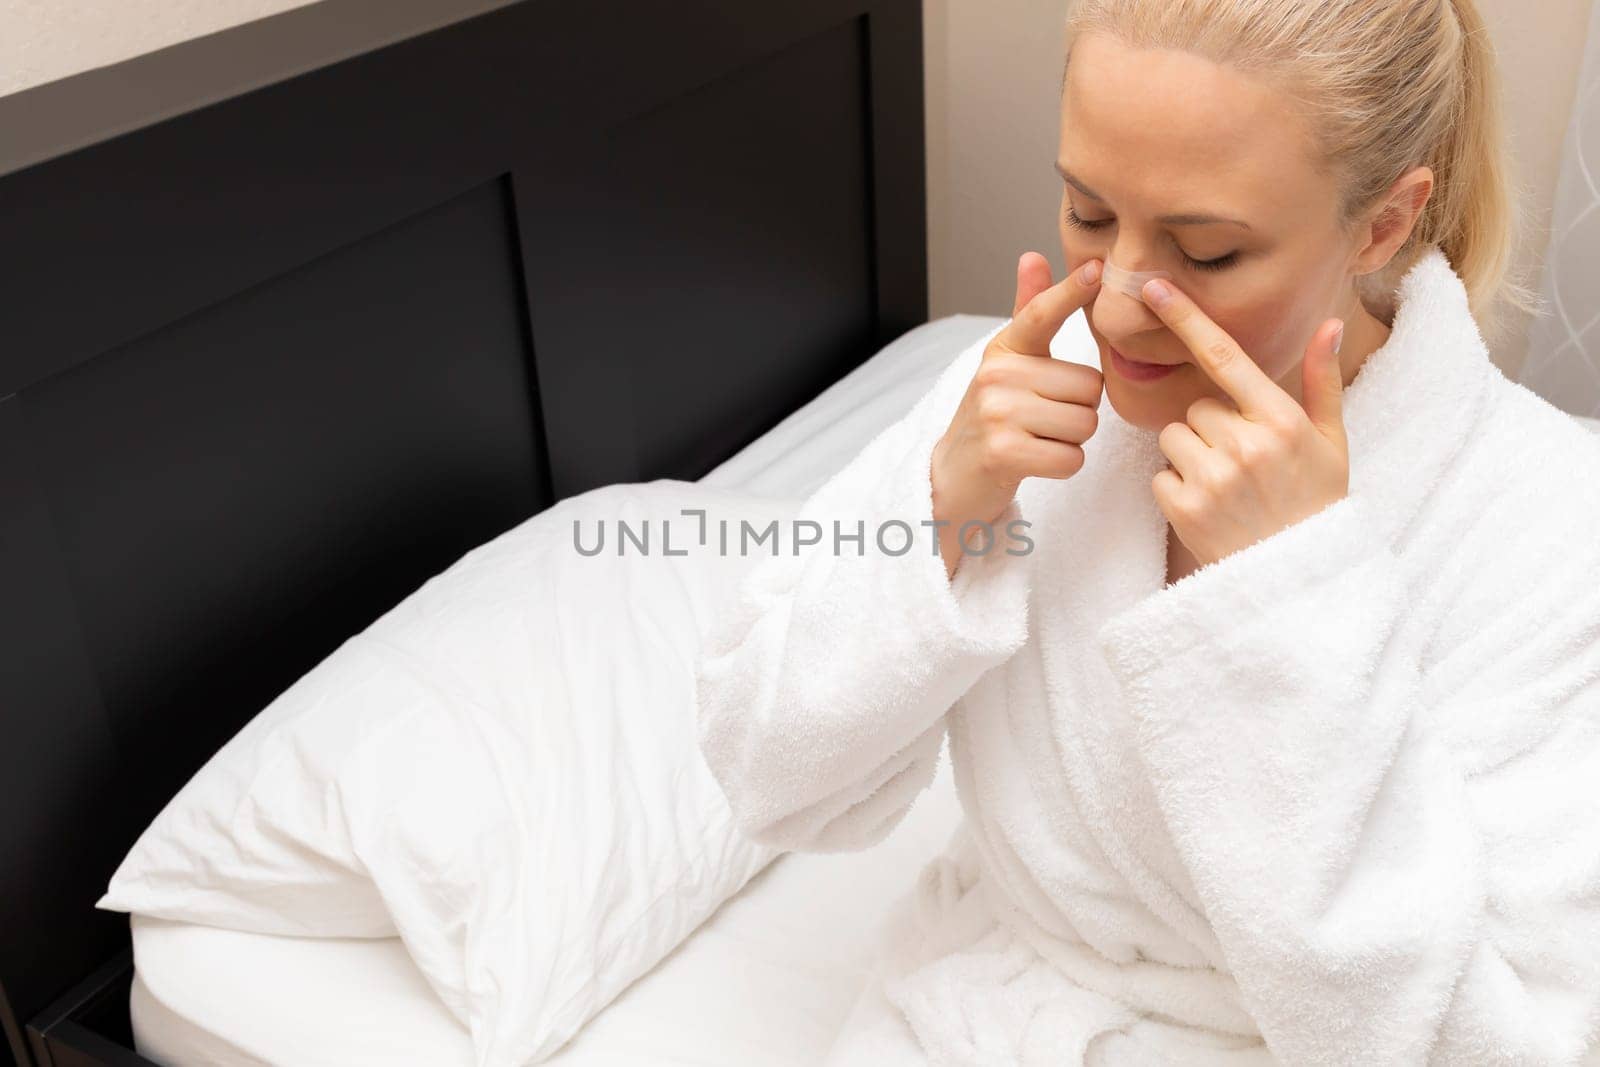 White Woman Applies Nasal Strip on Nose Before Going To Bed, Sitting on Bed. Stop Drug-free, Snoring, Sleeping Apnea Solution. Copy Space. Adhesive Bandage For Better Healthy Breathing. Horizontal. by netatsi